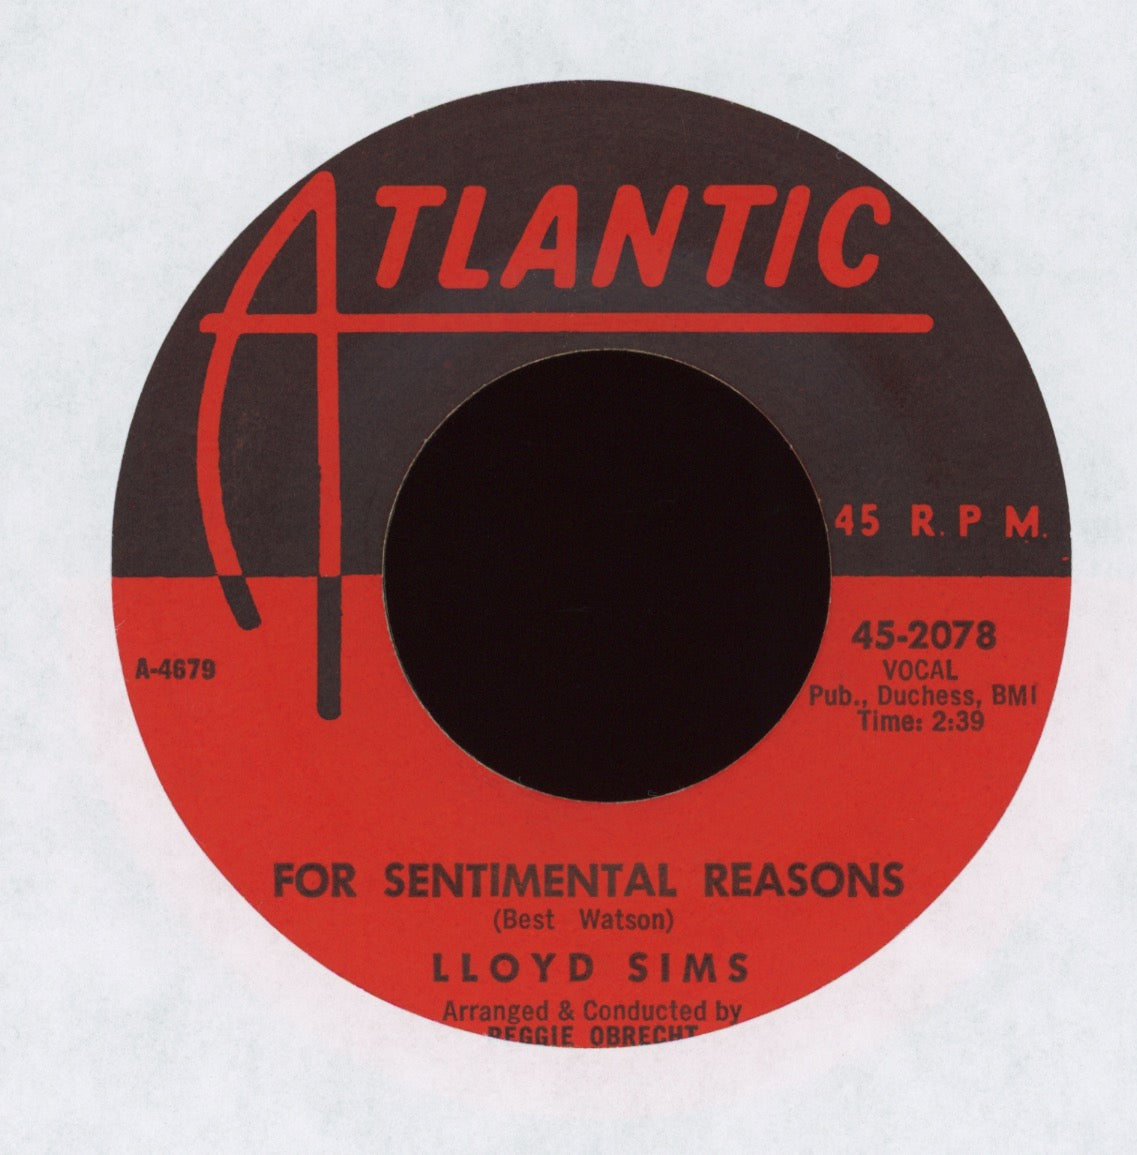 Lloyd Sims - I Want To Know on Atlantic